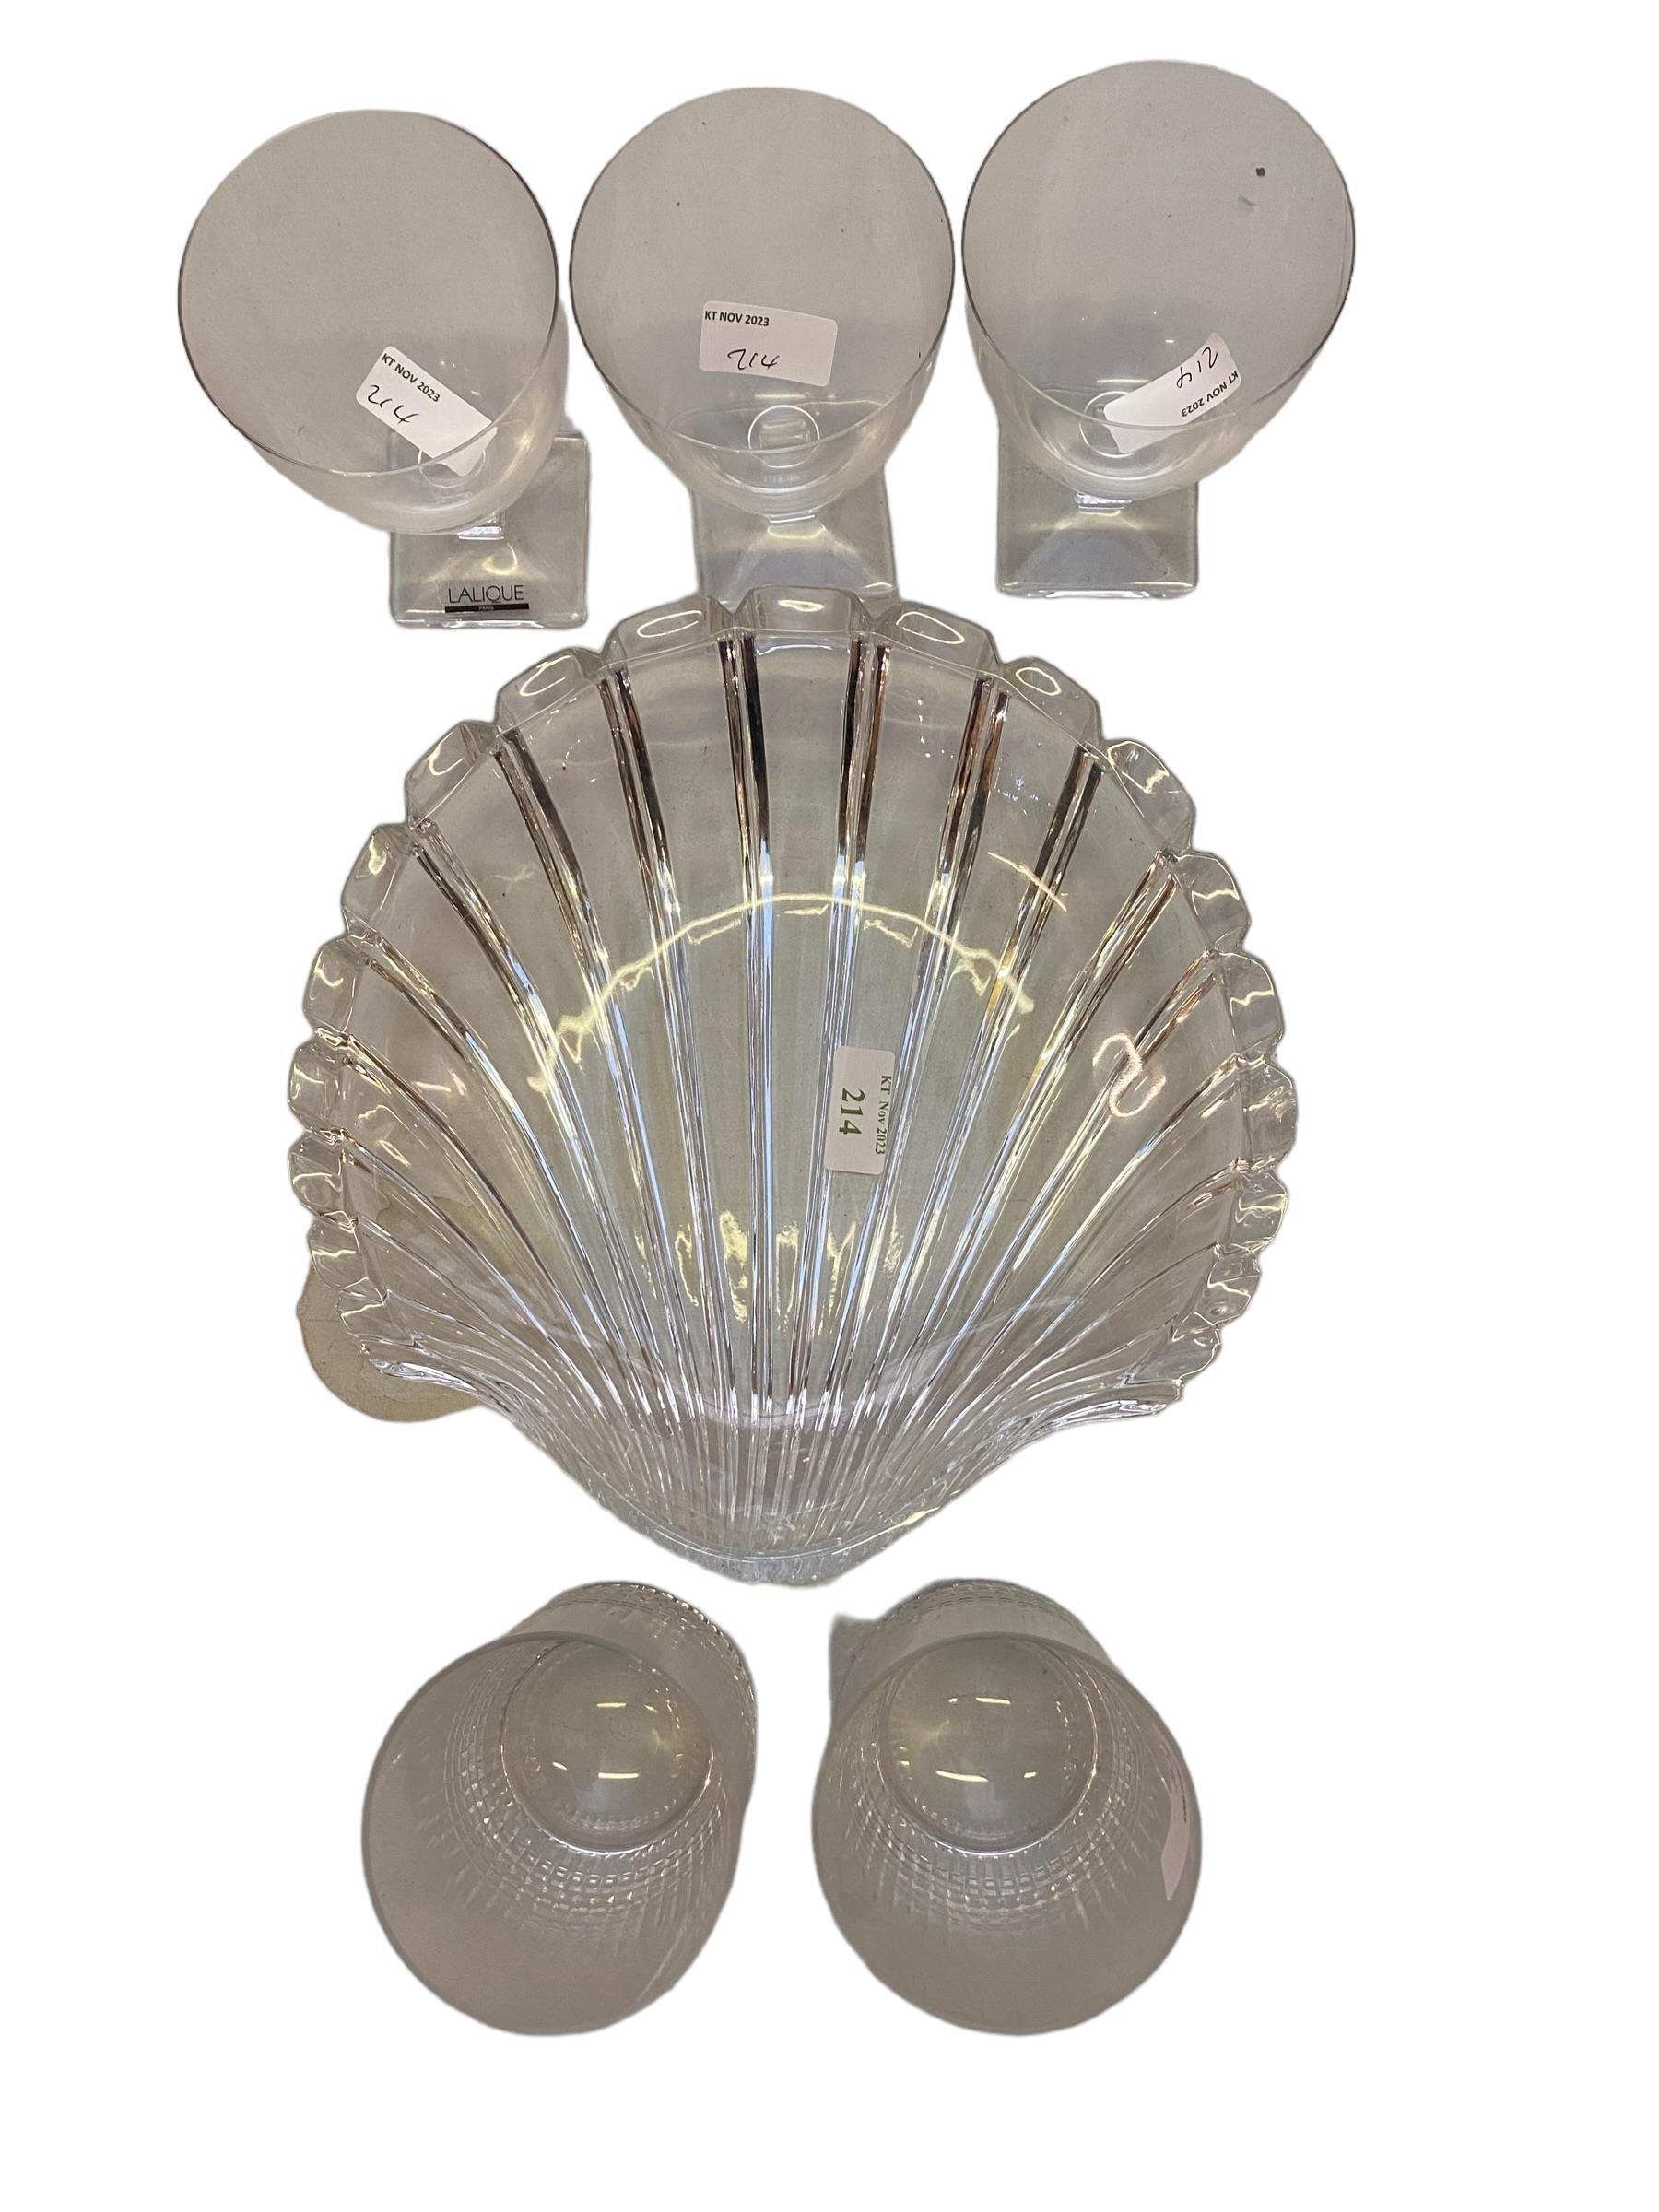 Pair of Baccarat tumblers, 3 Lalique wine glasses with square bases and a scallop dish - Image 2 of 4